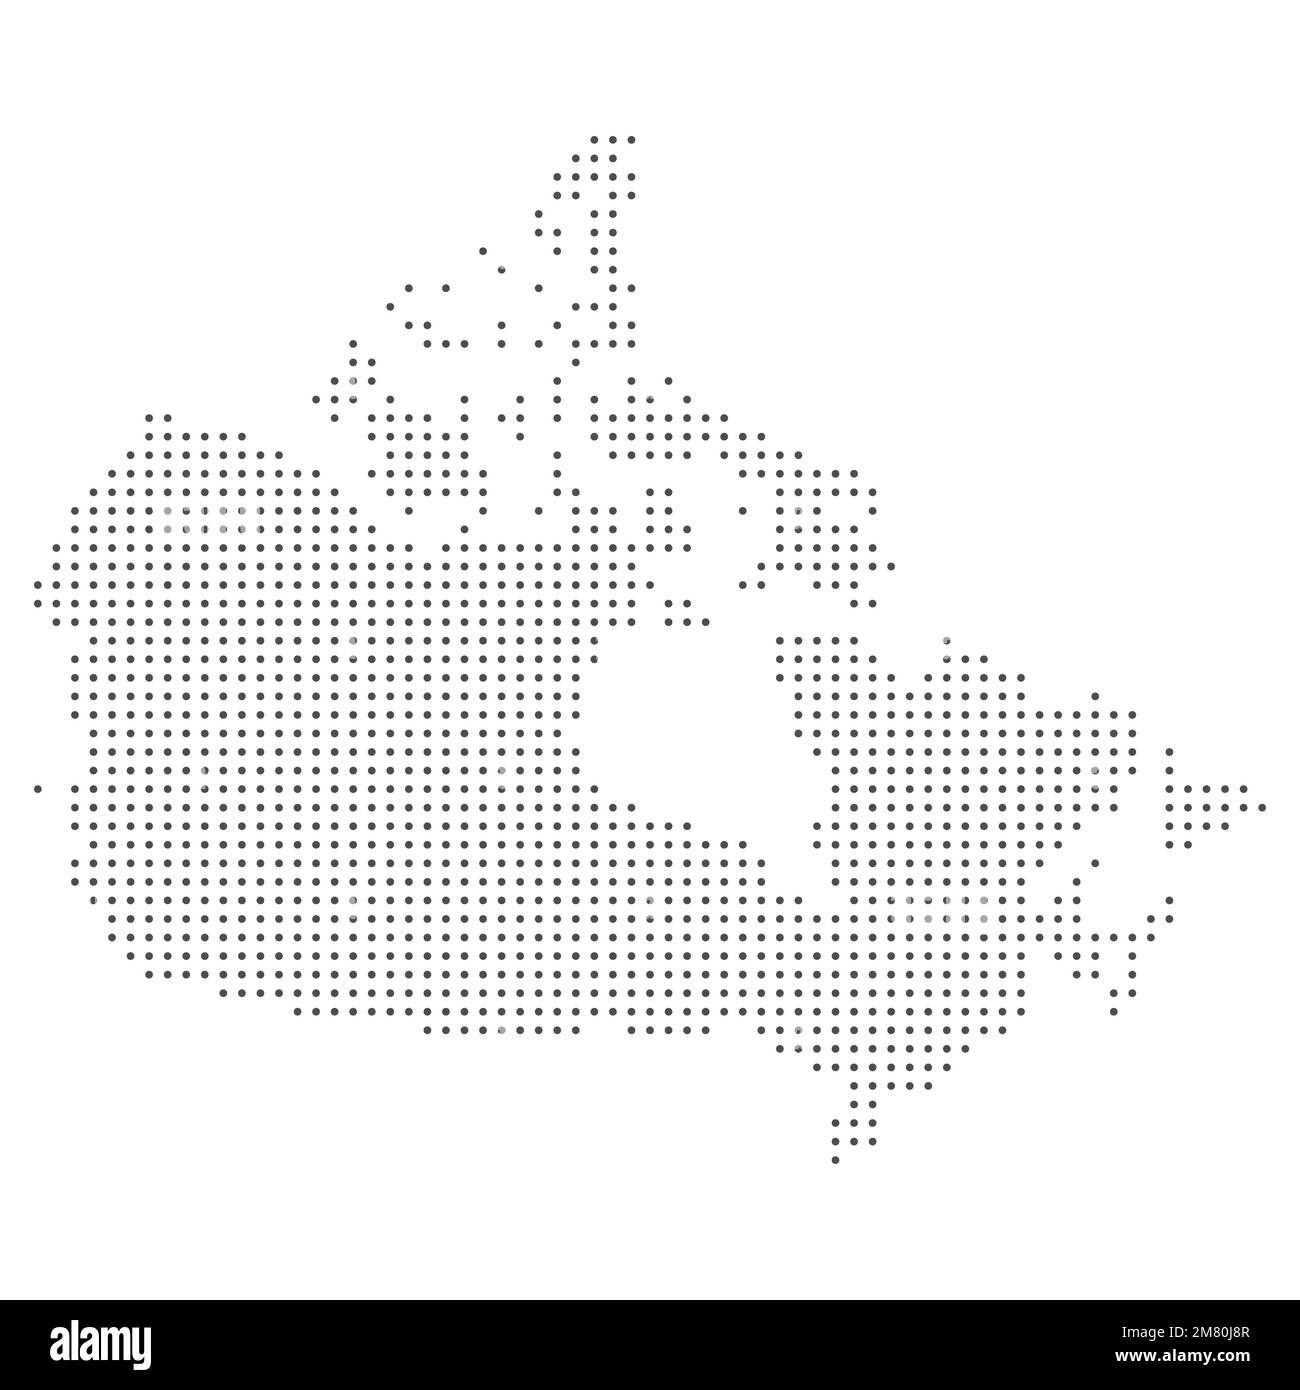 Map of Canada. Silhouette of Canada country map. Halftone dots Vector illustration. Eps 10. Stock Vector